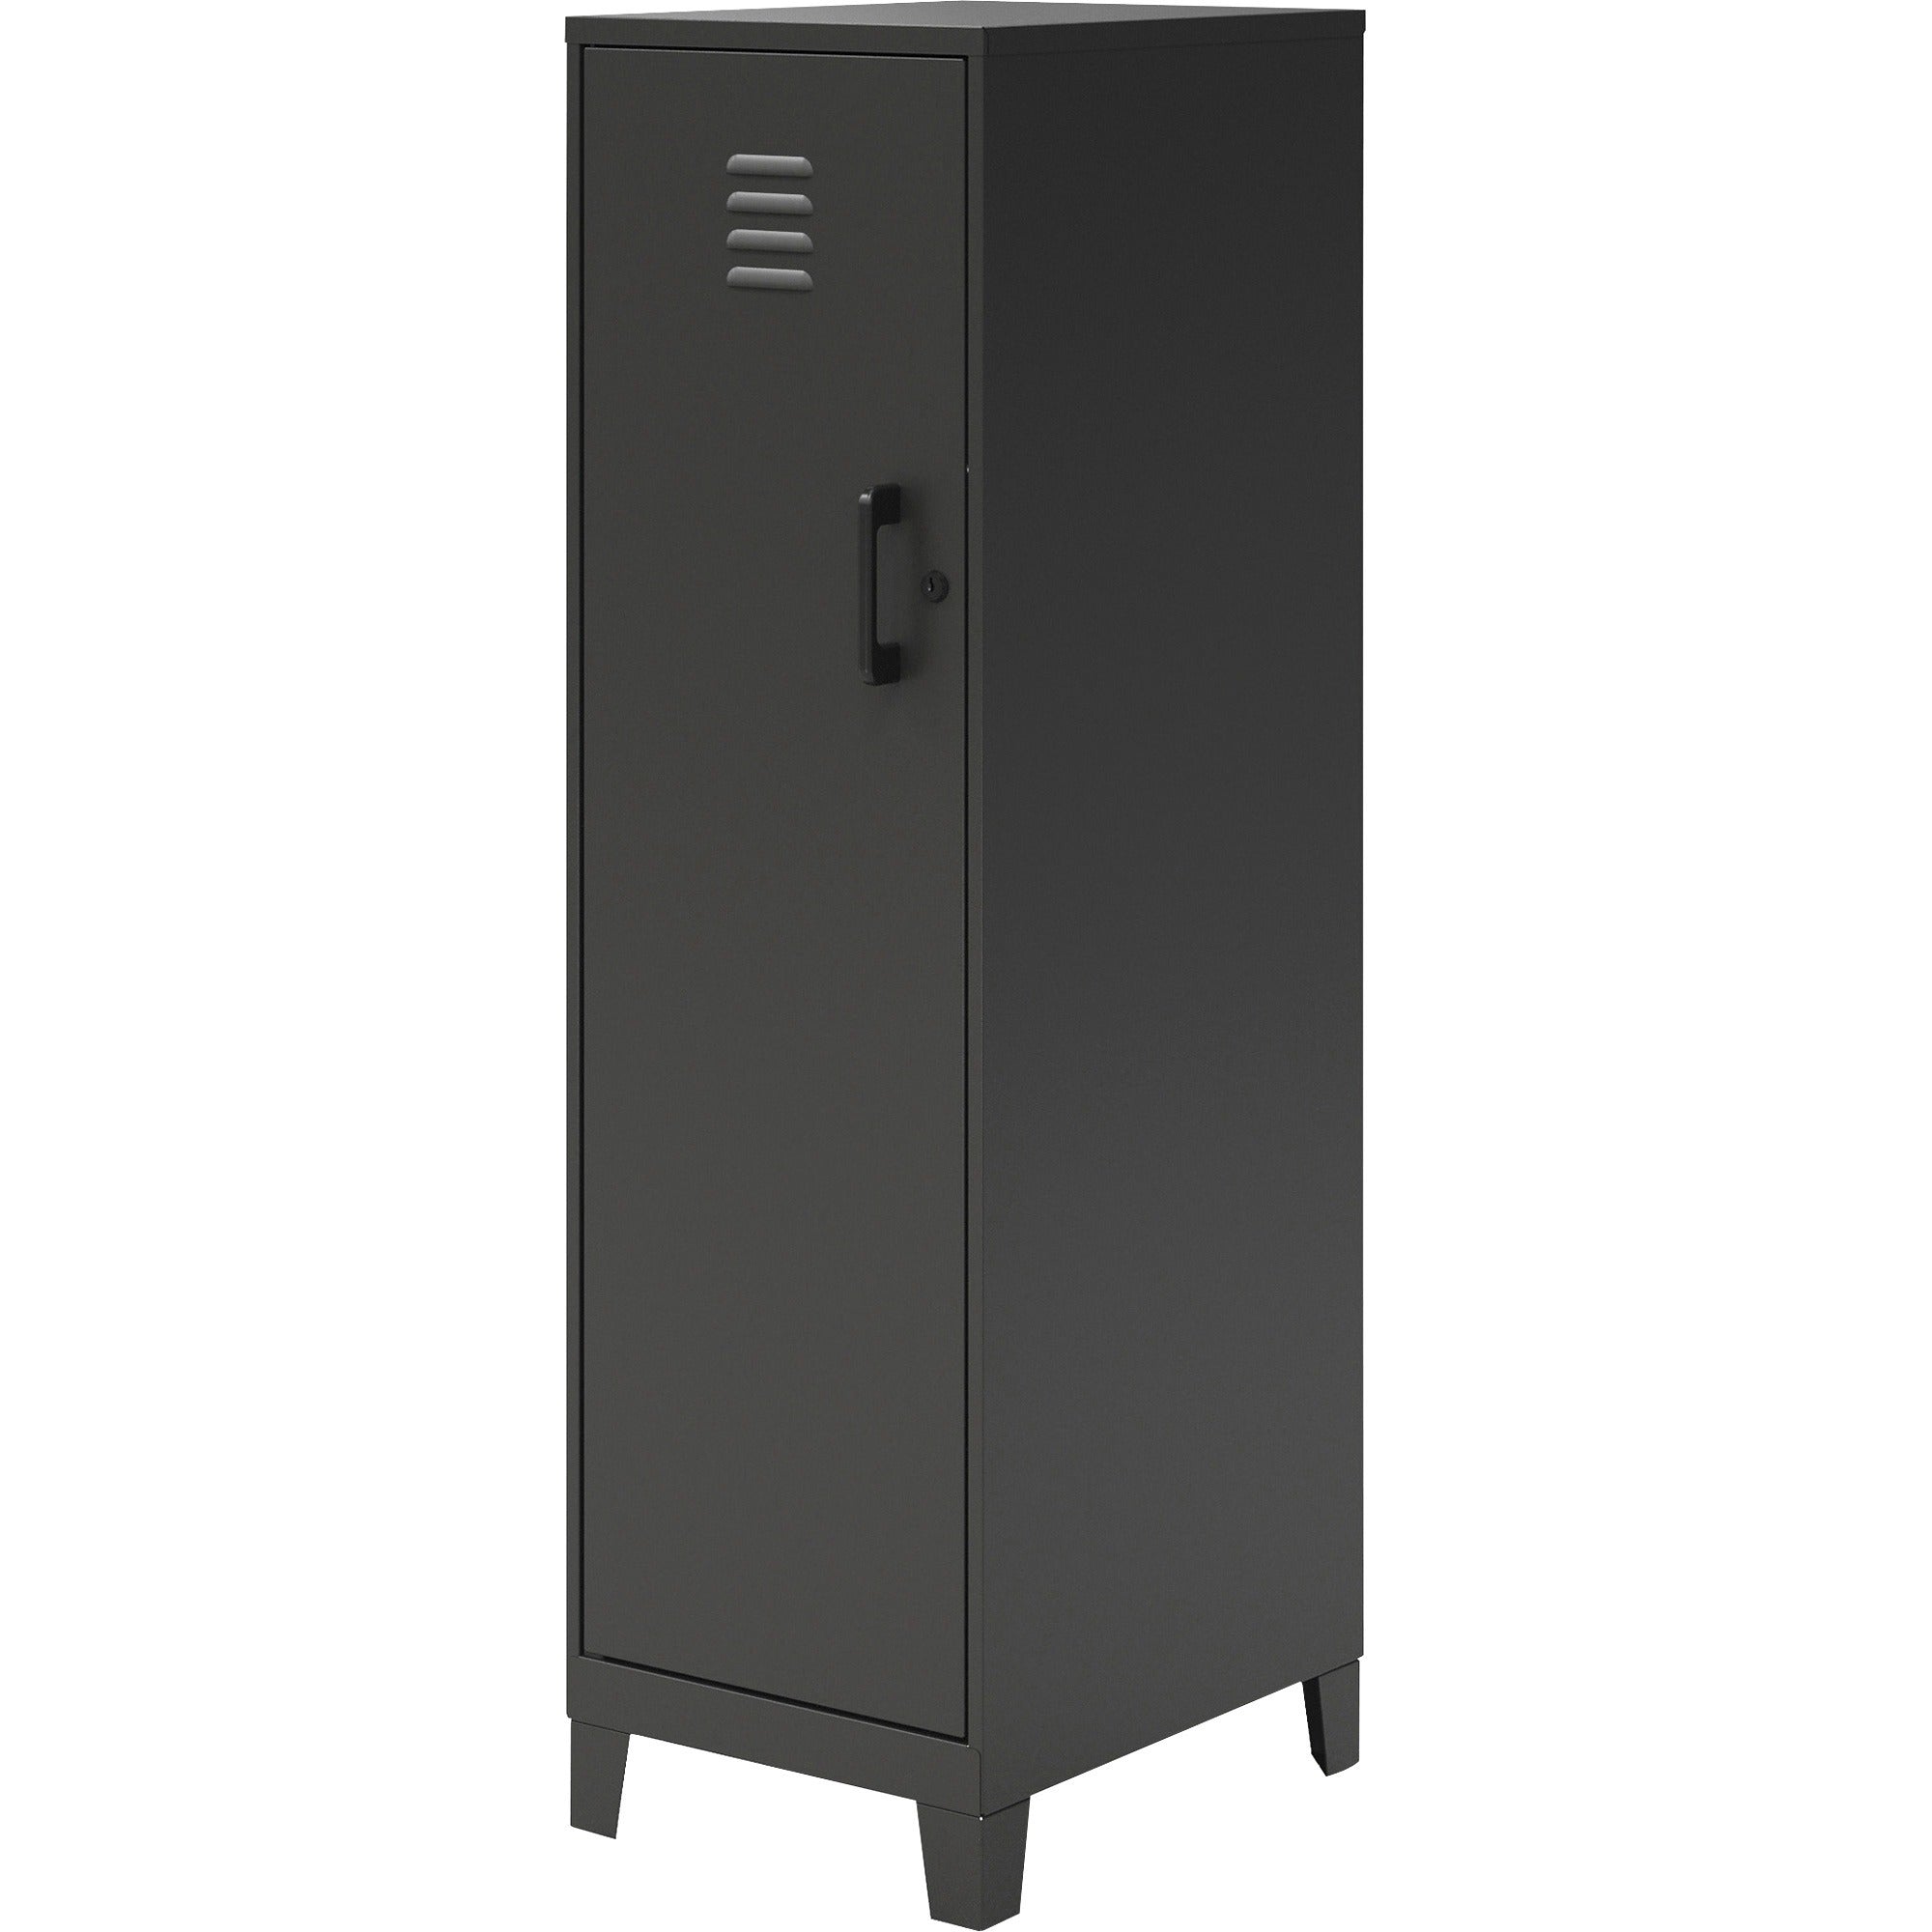 nusparc-personal-locker-4-shelves-for-office-home-sport-equipments-toy-game-classroom-playroom-basement-garage-overall-size-533-x-142-x-18-black-steel-taa-compliant_nprsl418zzbk - 3